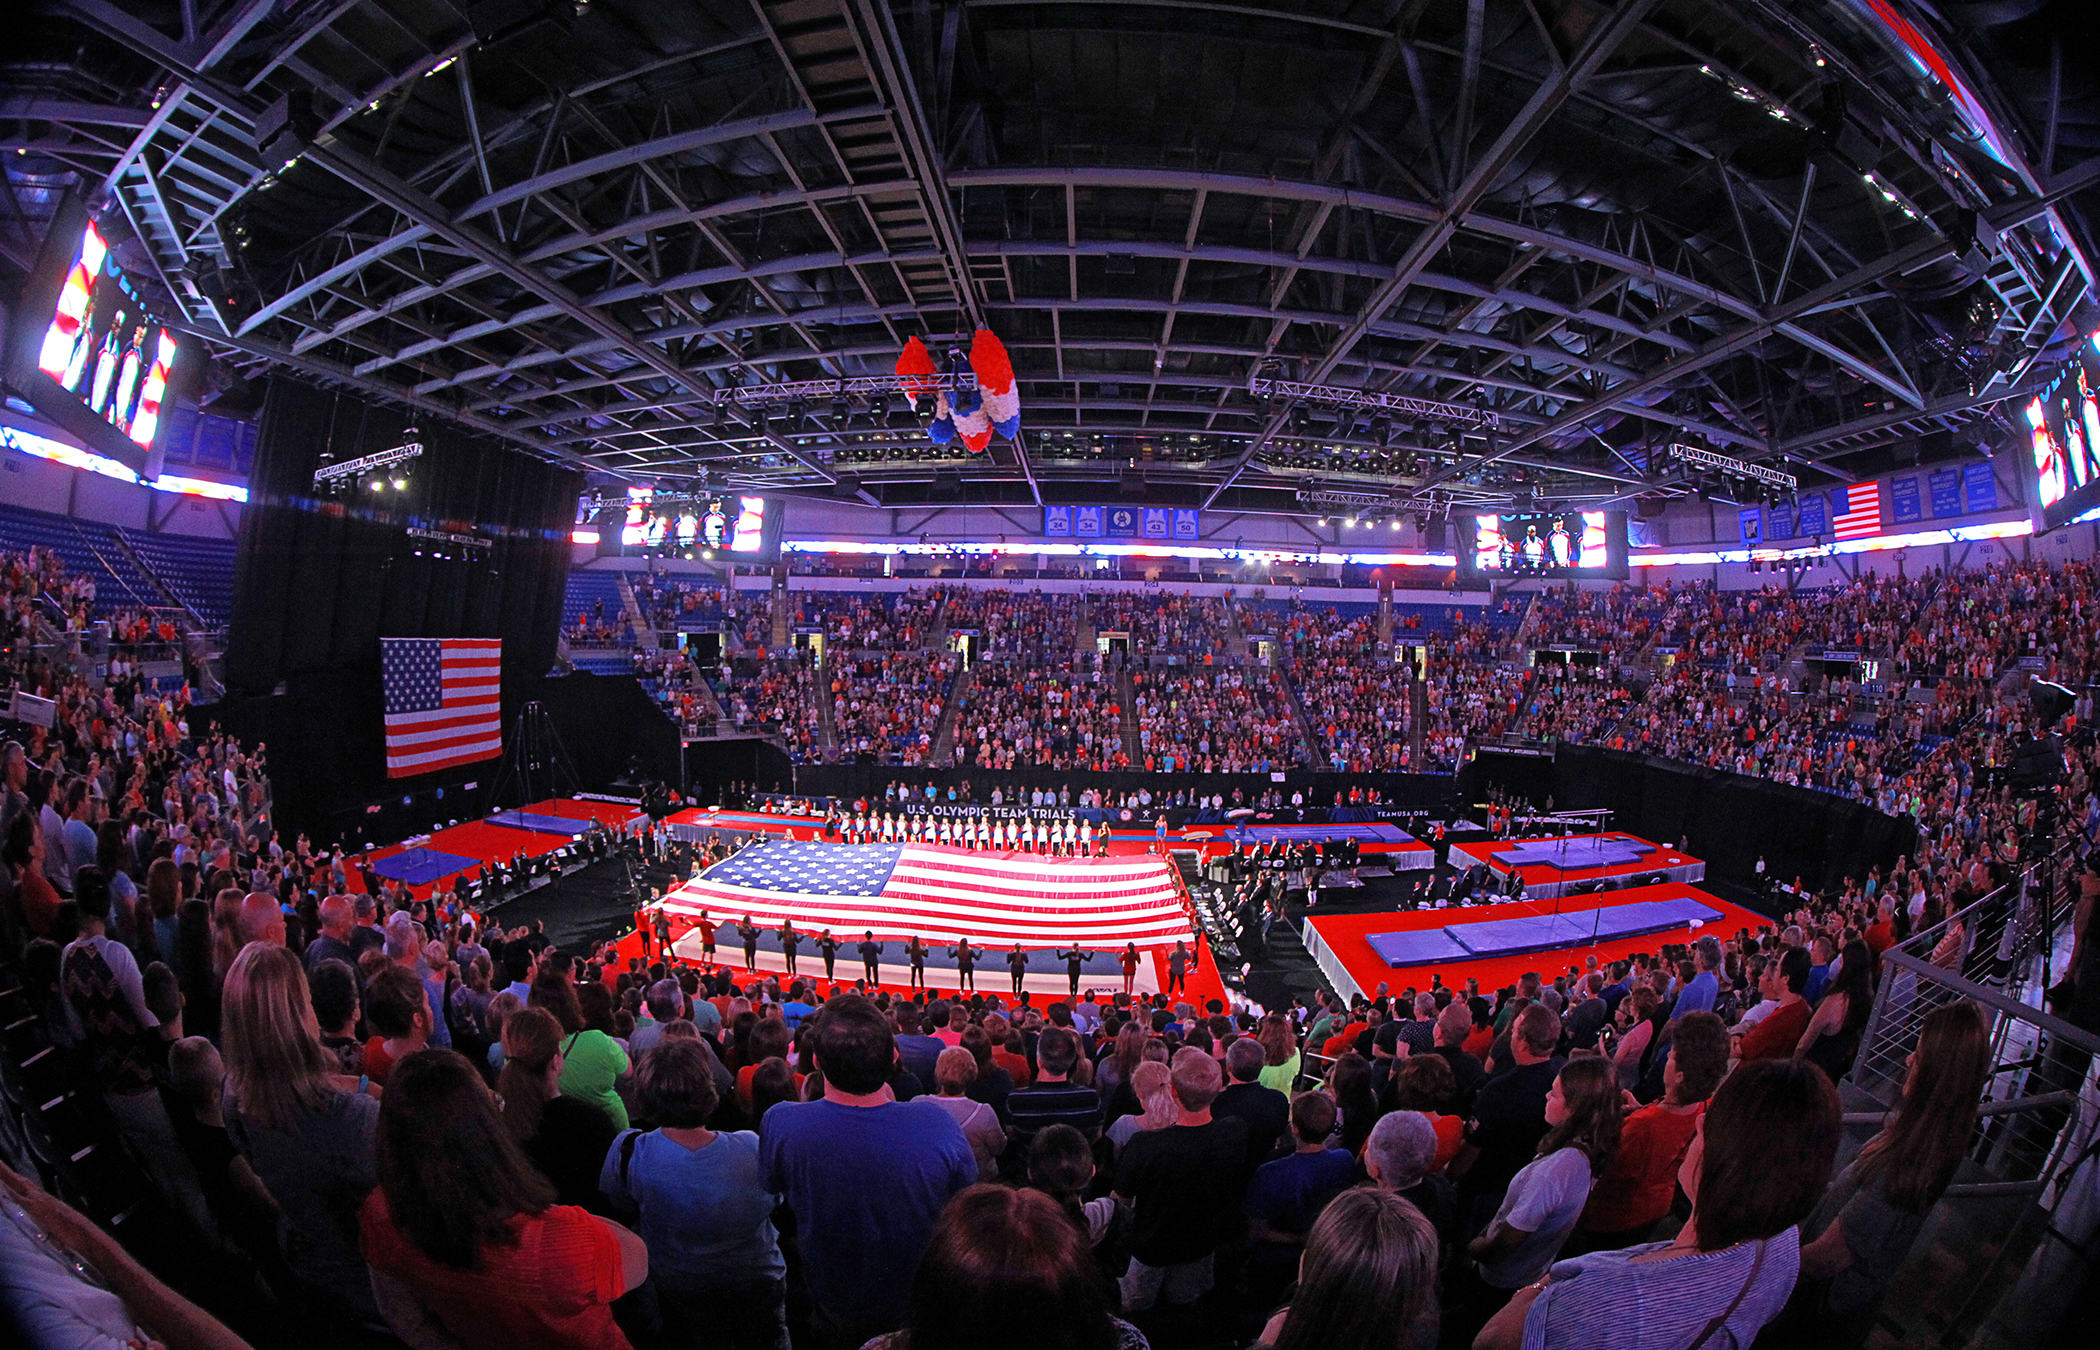 U.S. OLYMPIC TEAM TRIALS FOR GYMNASTICS RESCHEDULED FOR JUNE 24-27, 2021 IN ST. LOUIS